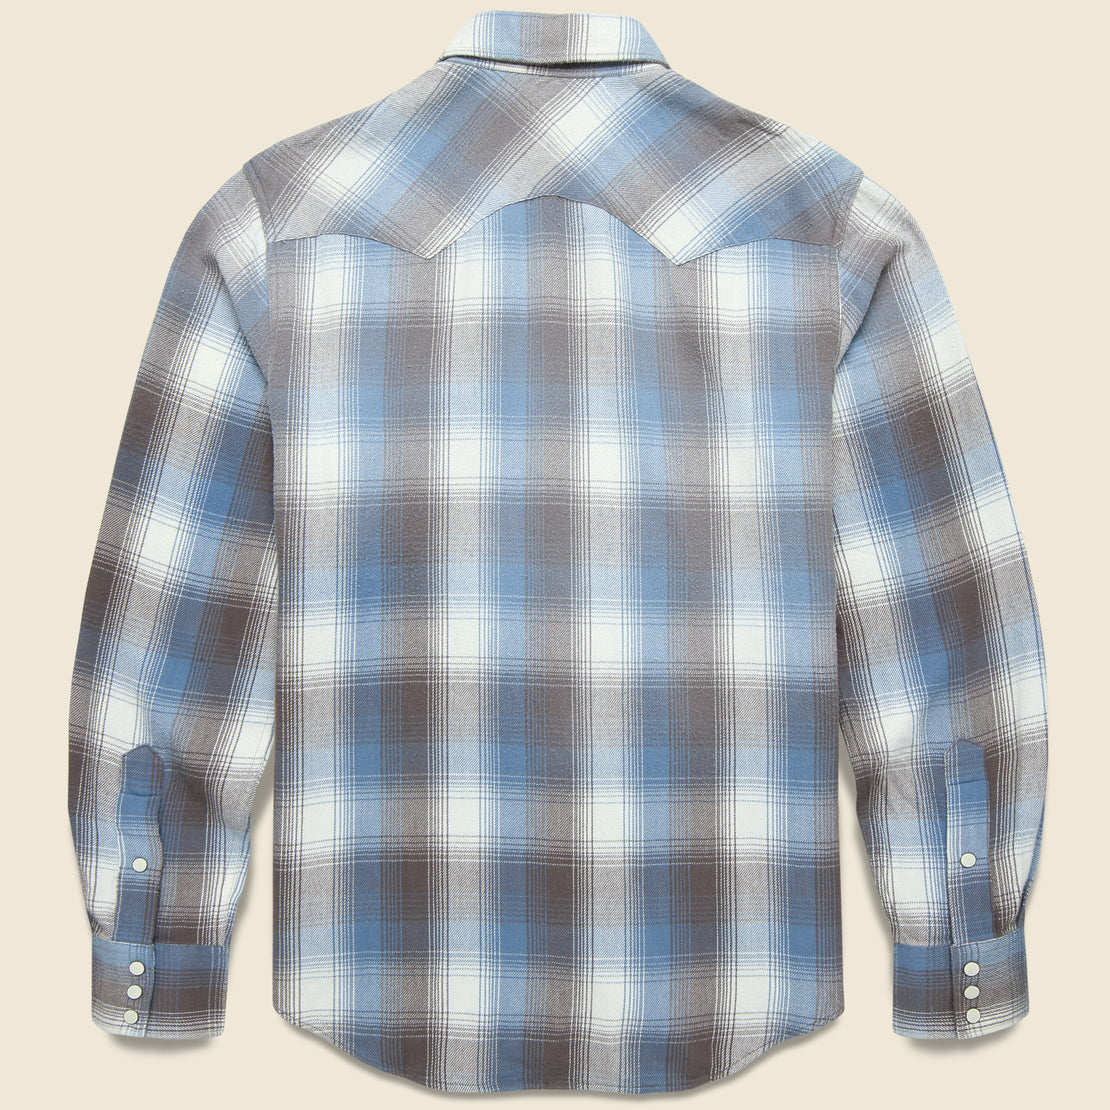 Allen Western Shirt - Blue Multi - RRL - STAG Provisions - Tops - L/S Woven - Plaid